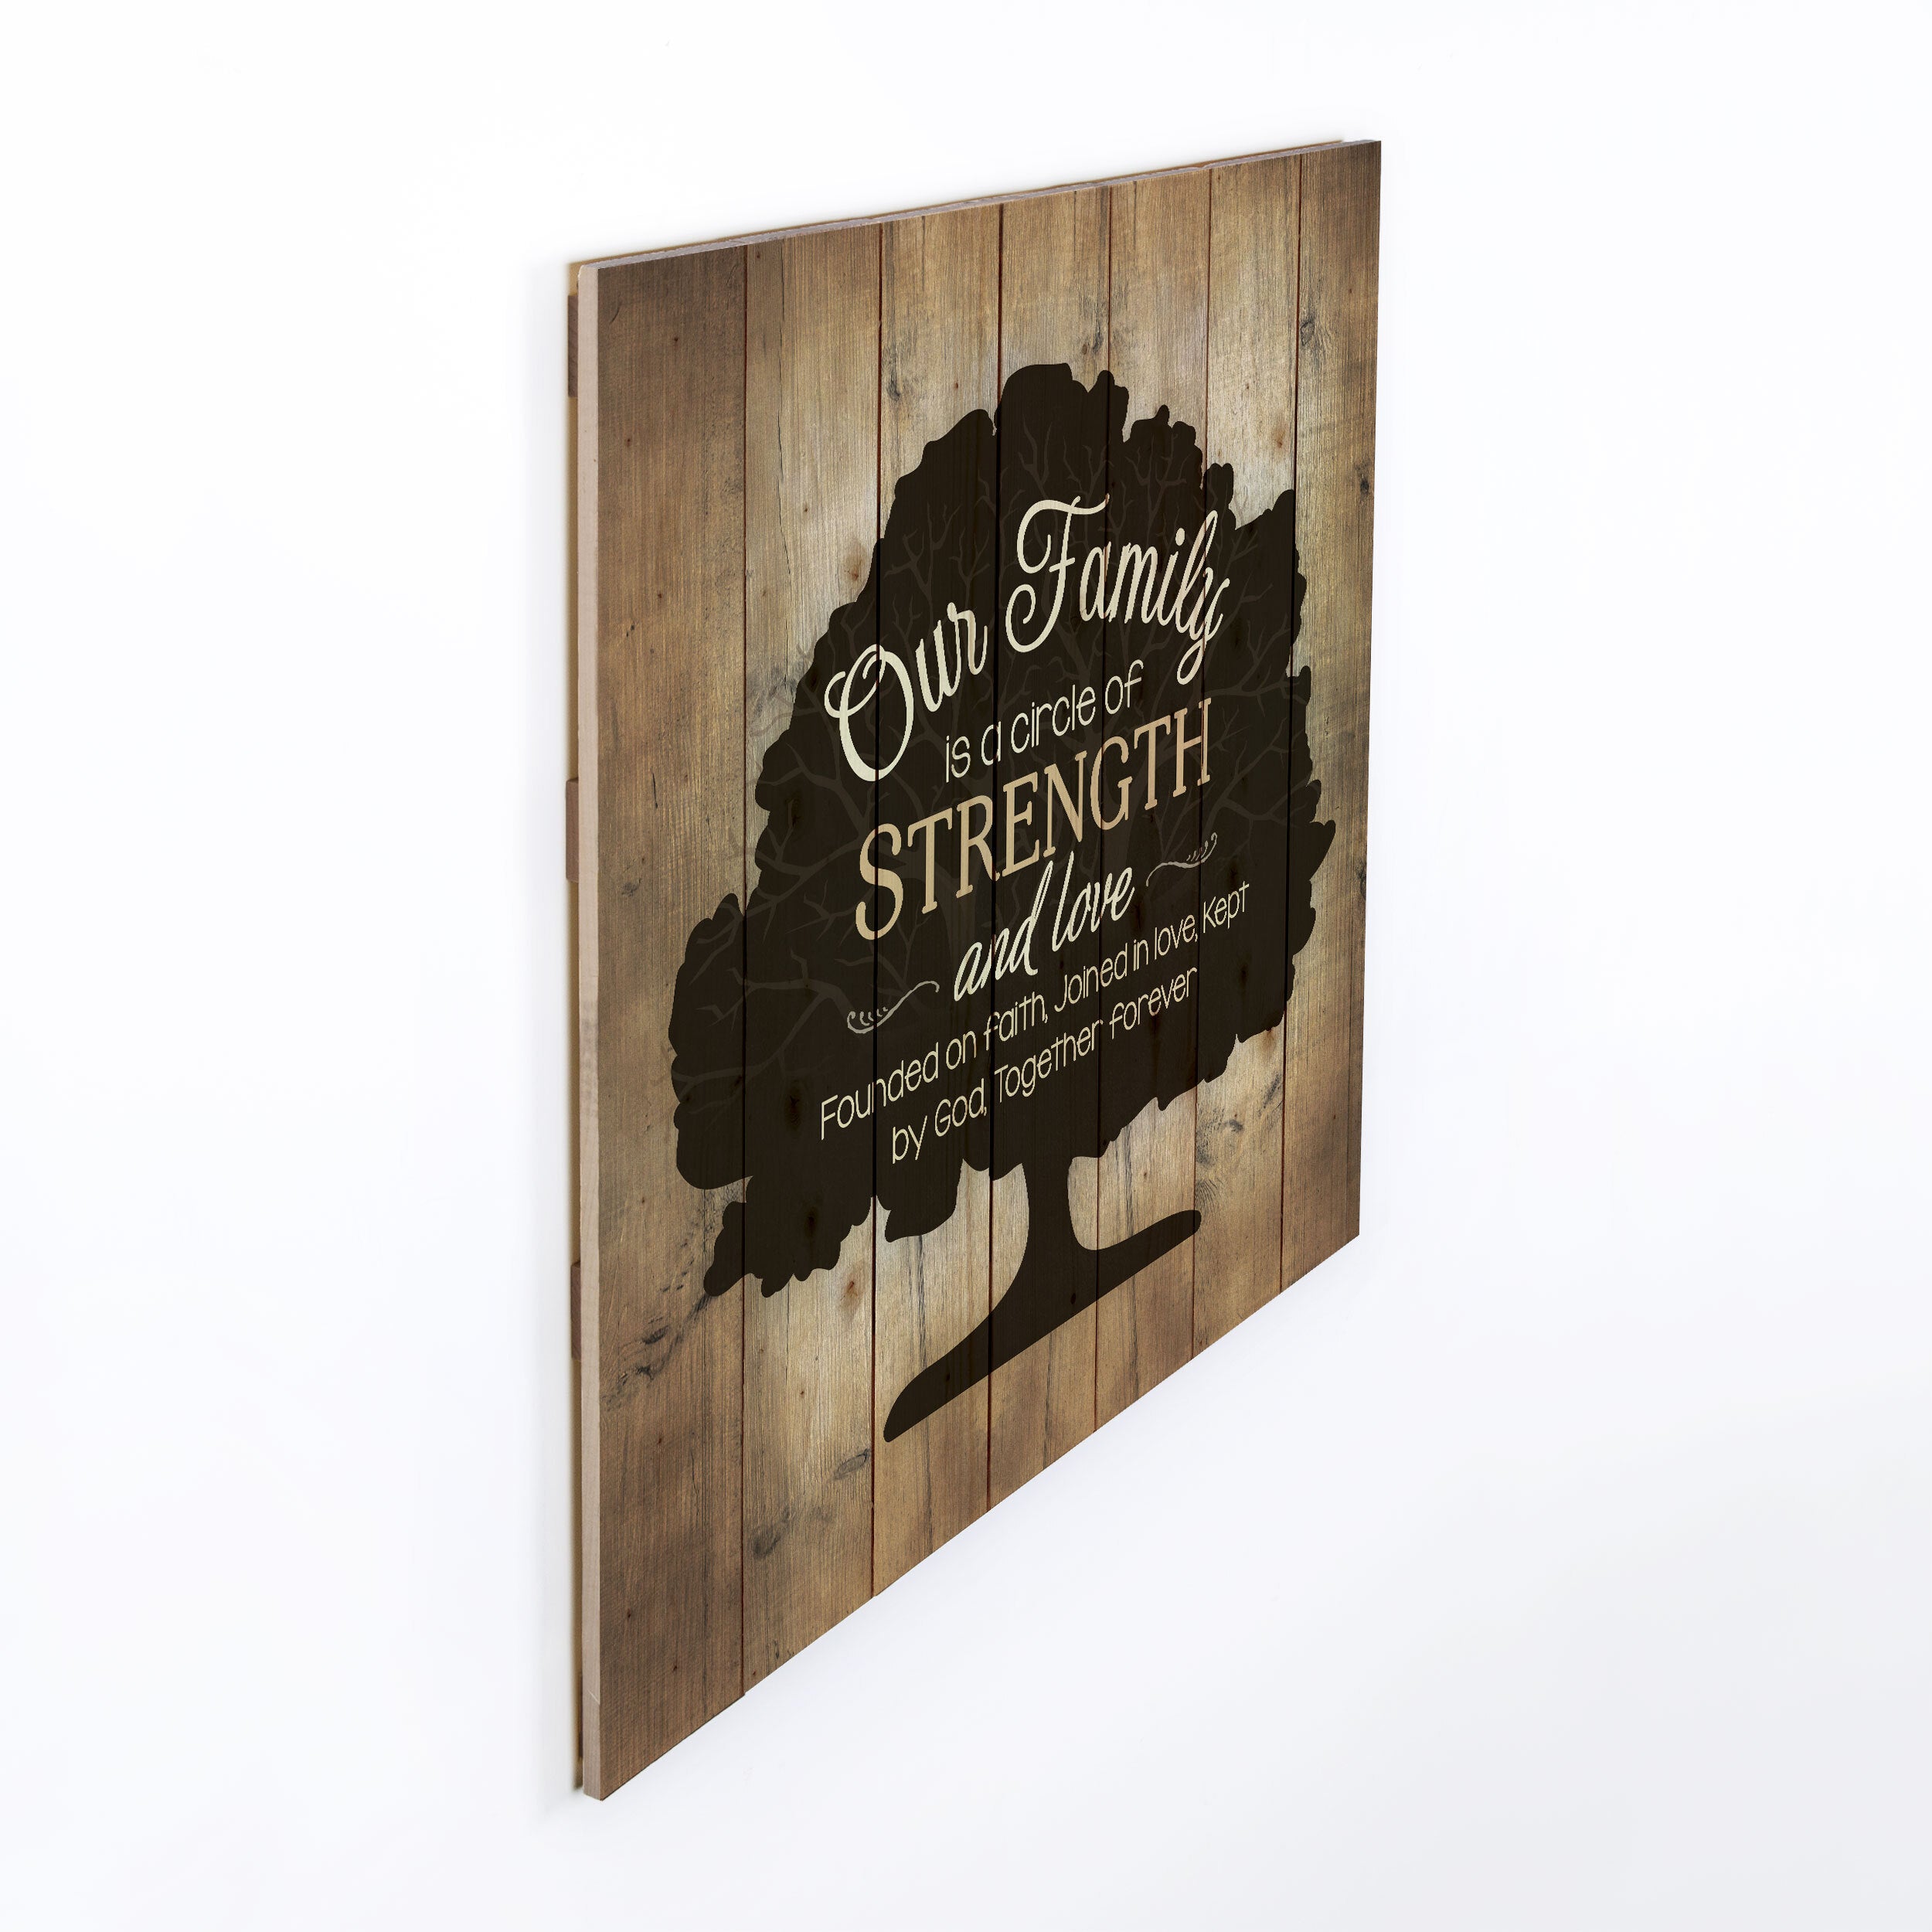 Our Family Is A Circle of Strength & Love Pallet Décor